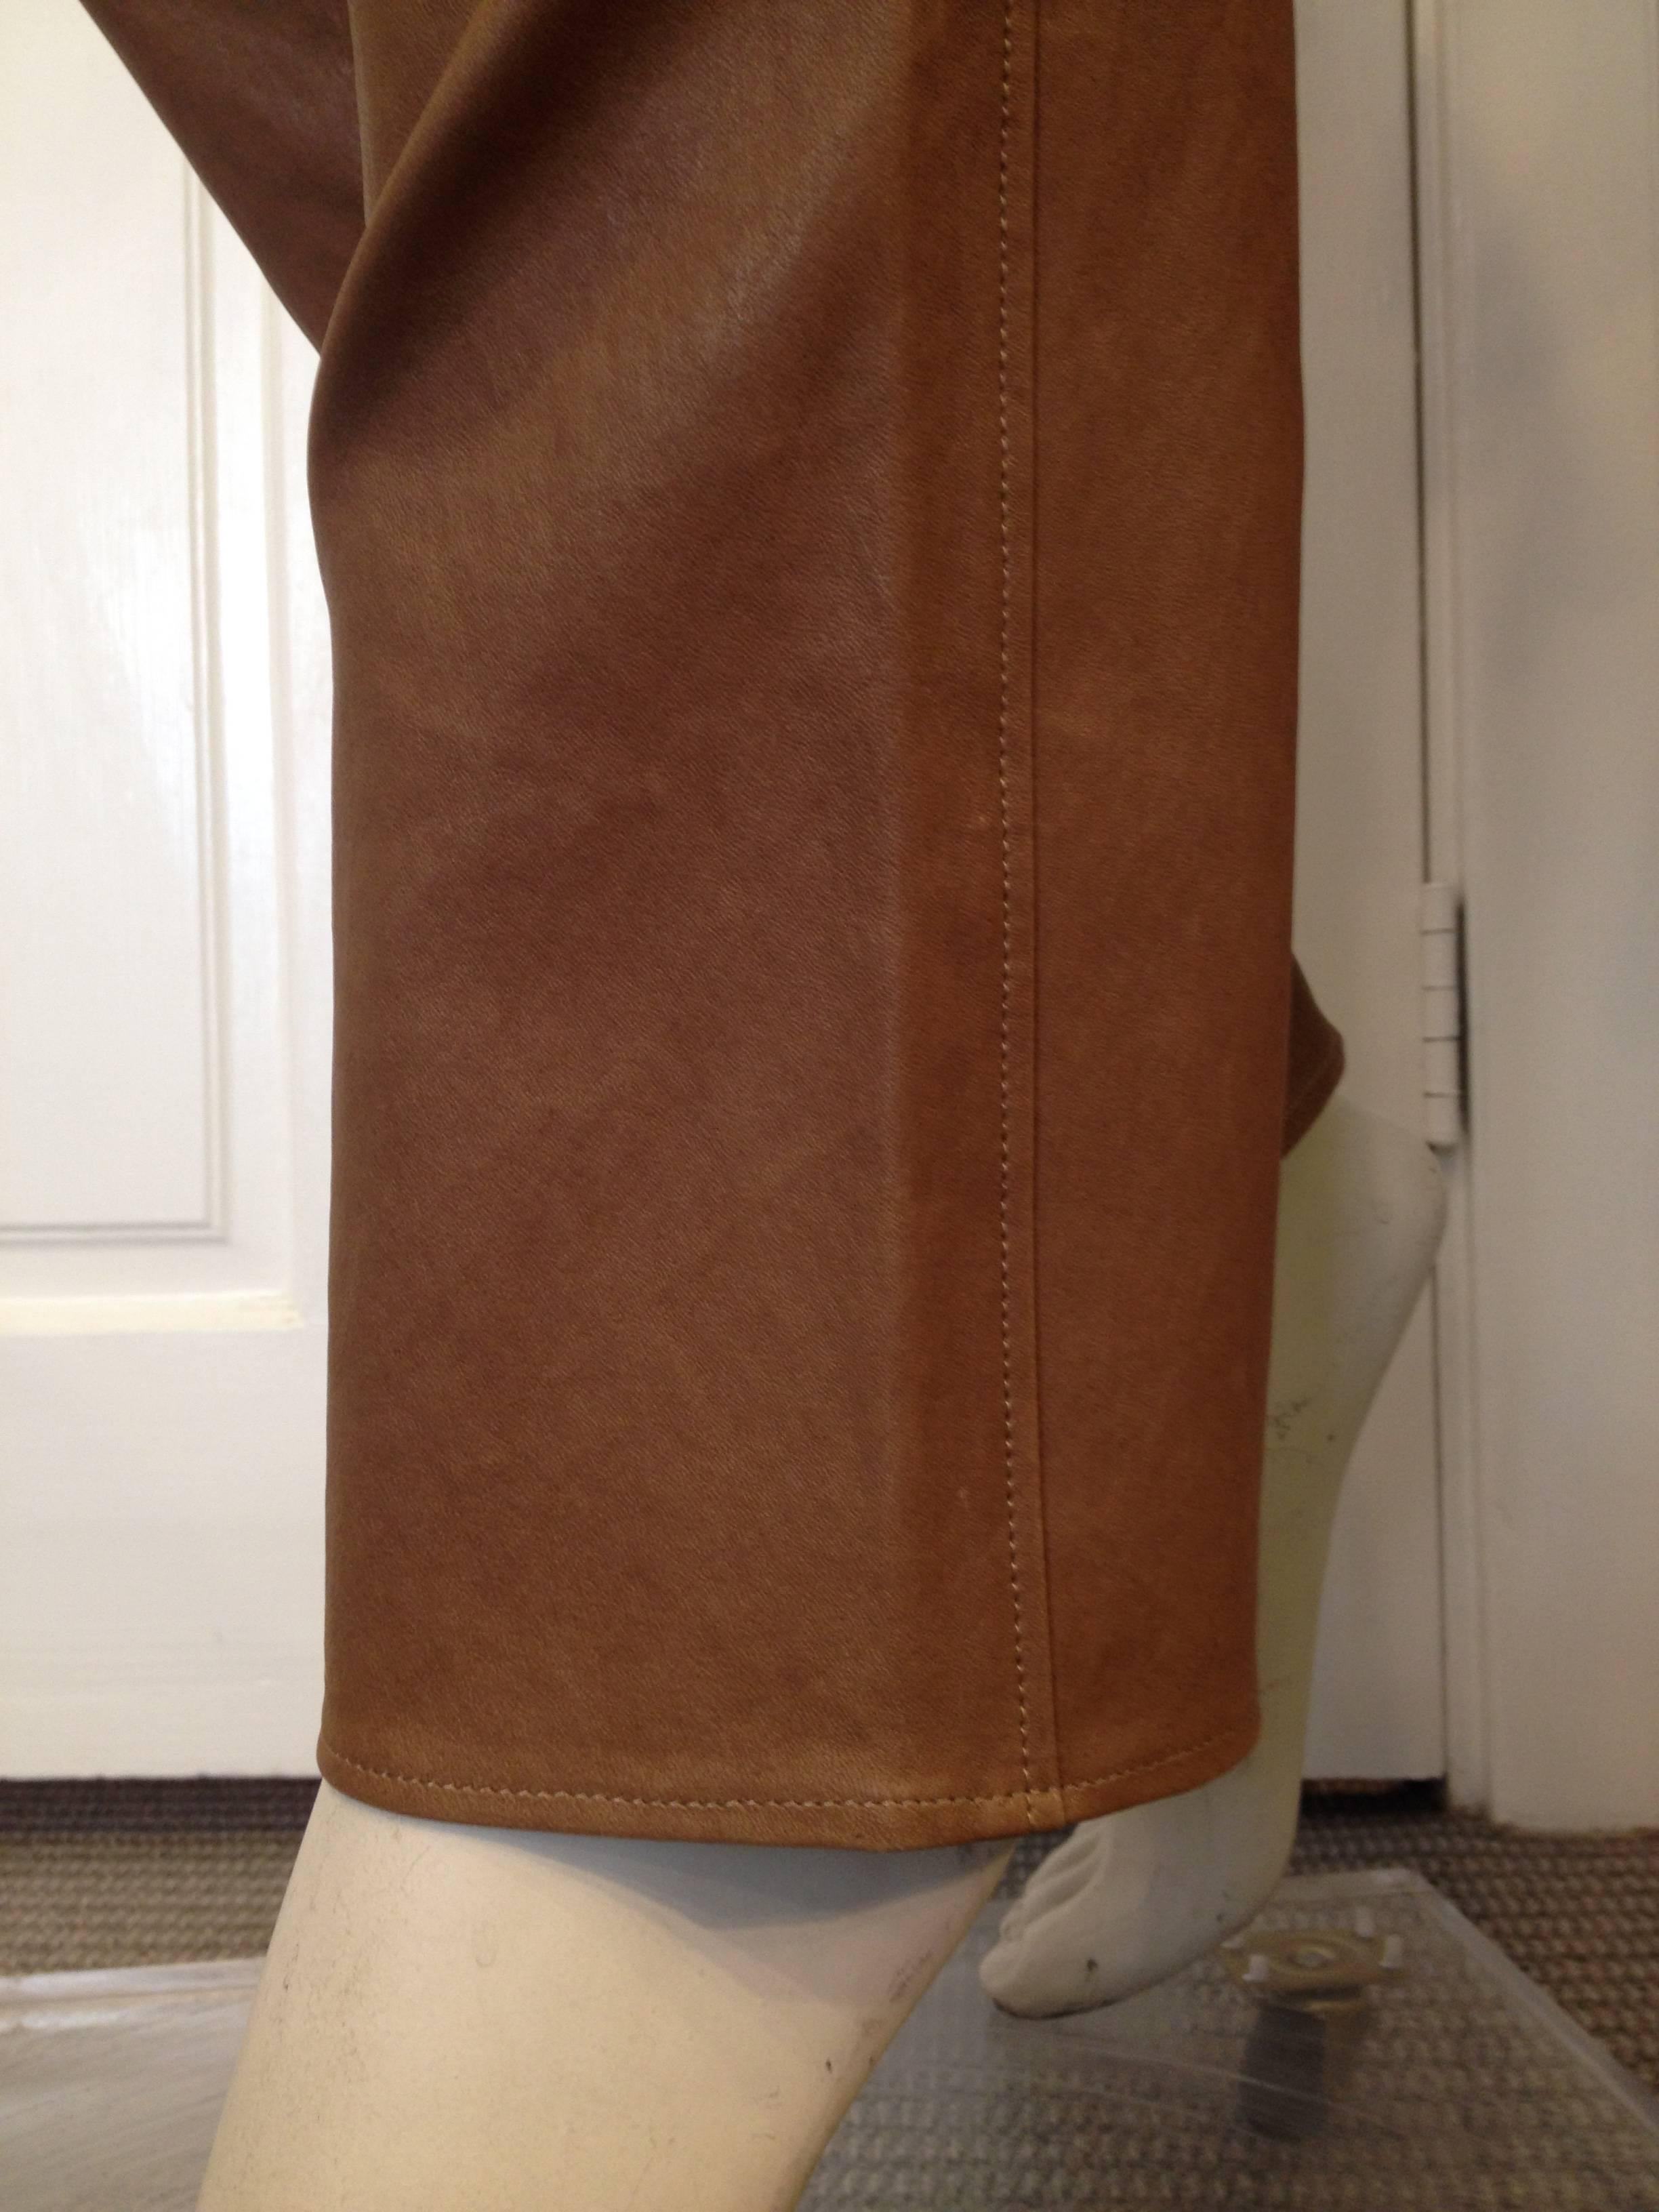 Stouls Caramel Brown Leather Pant Size S 4